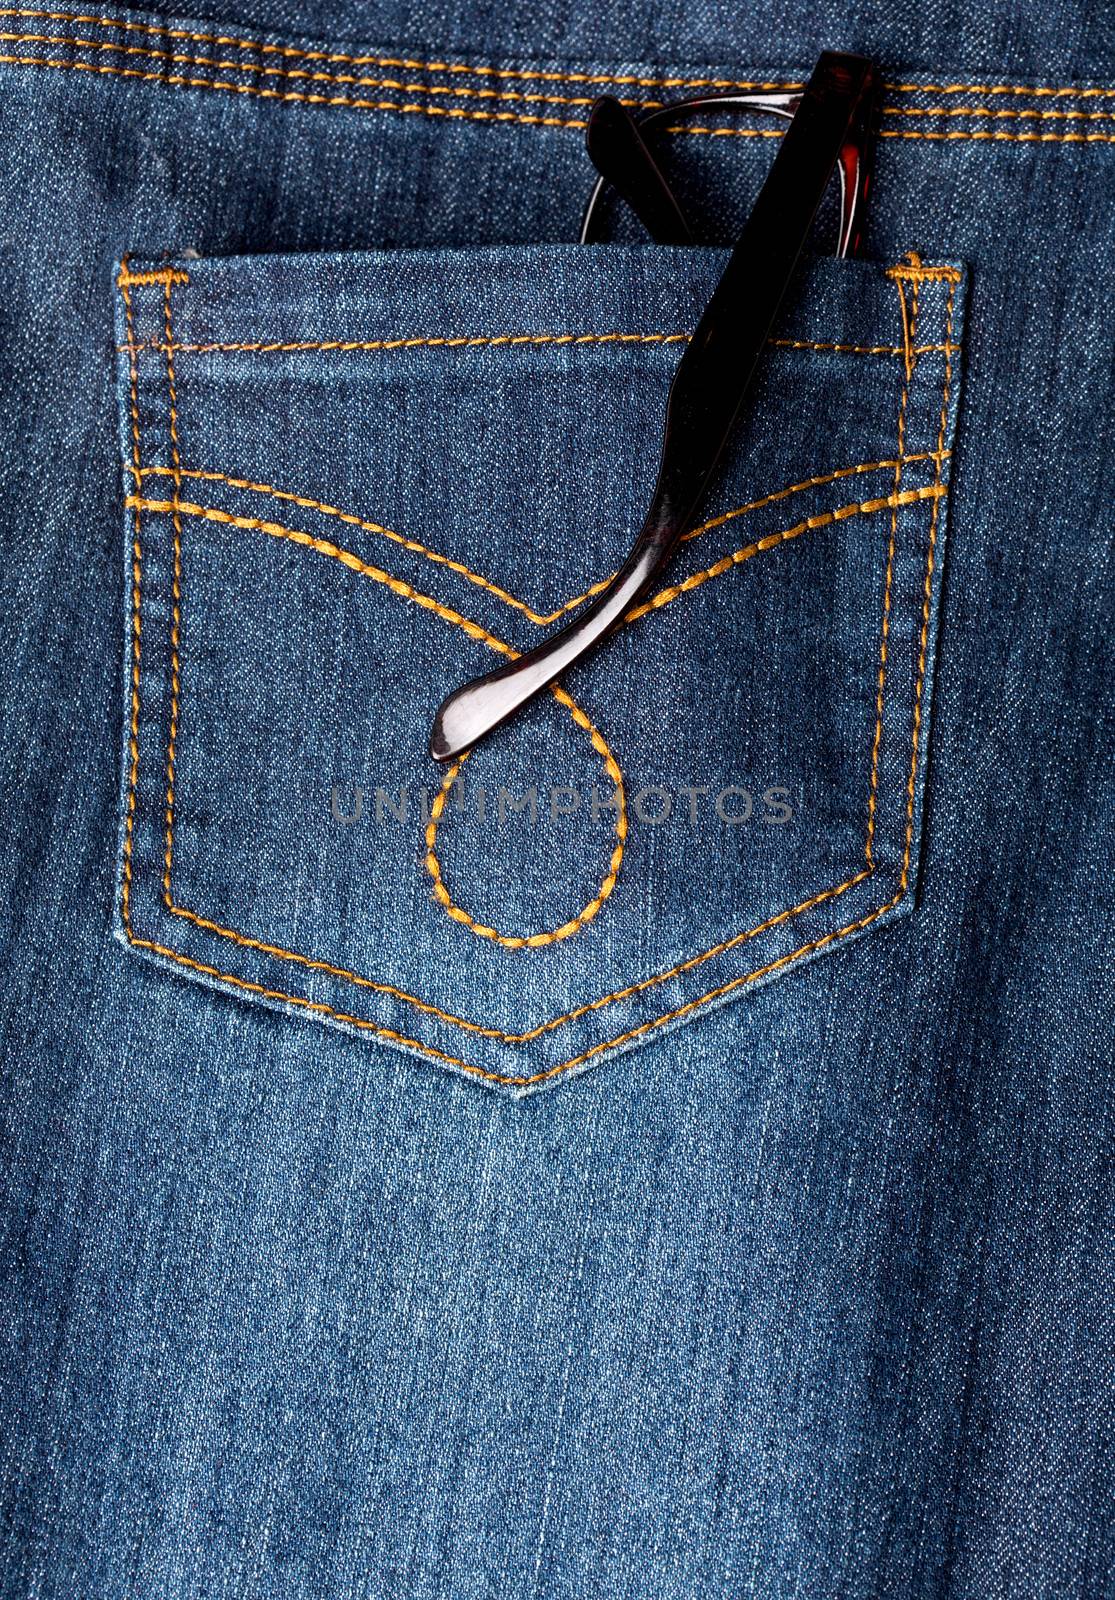 Eyeglasses in back pocket of jeans by stockyimages